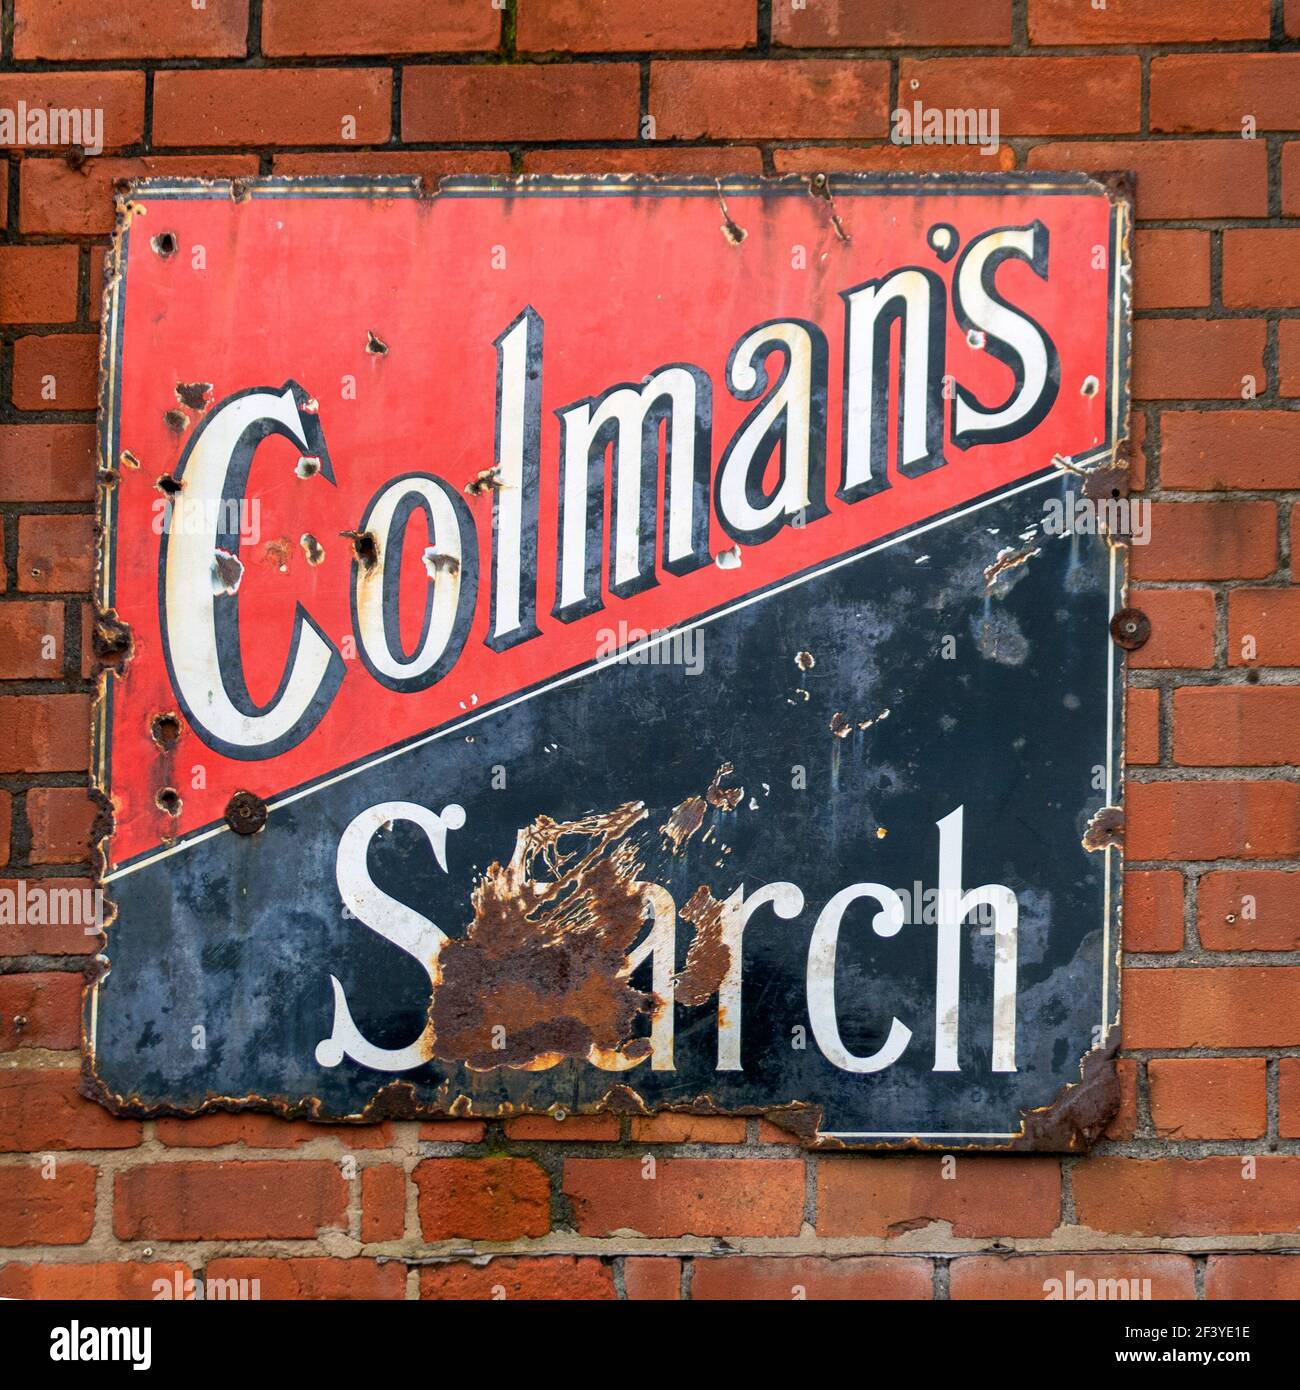 Close up of Vintage old advert enamel advertising sign for Colmans Starch England UK Stock Photo